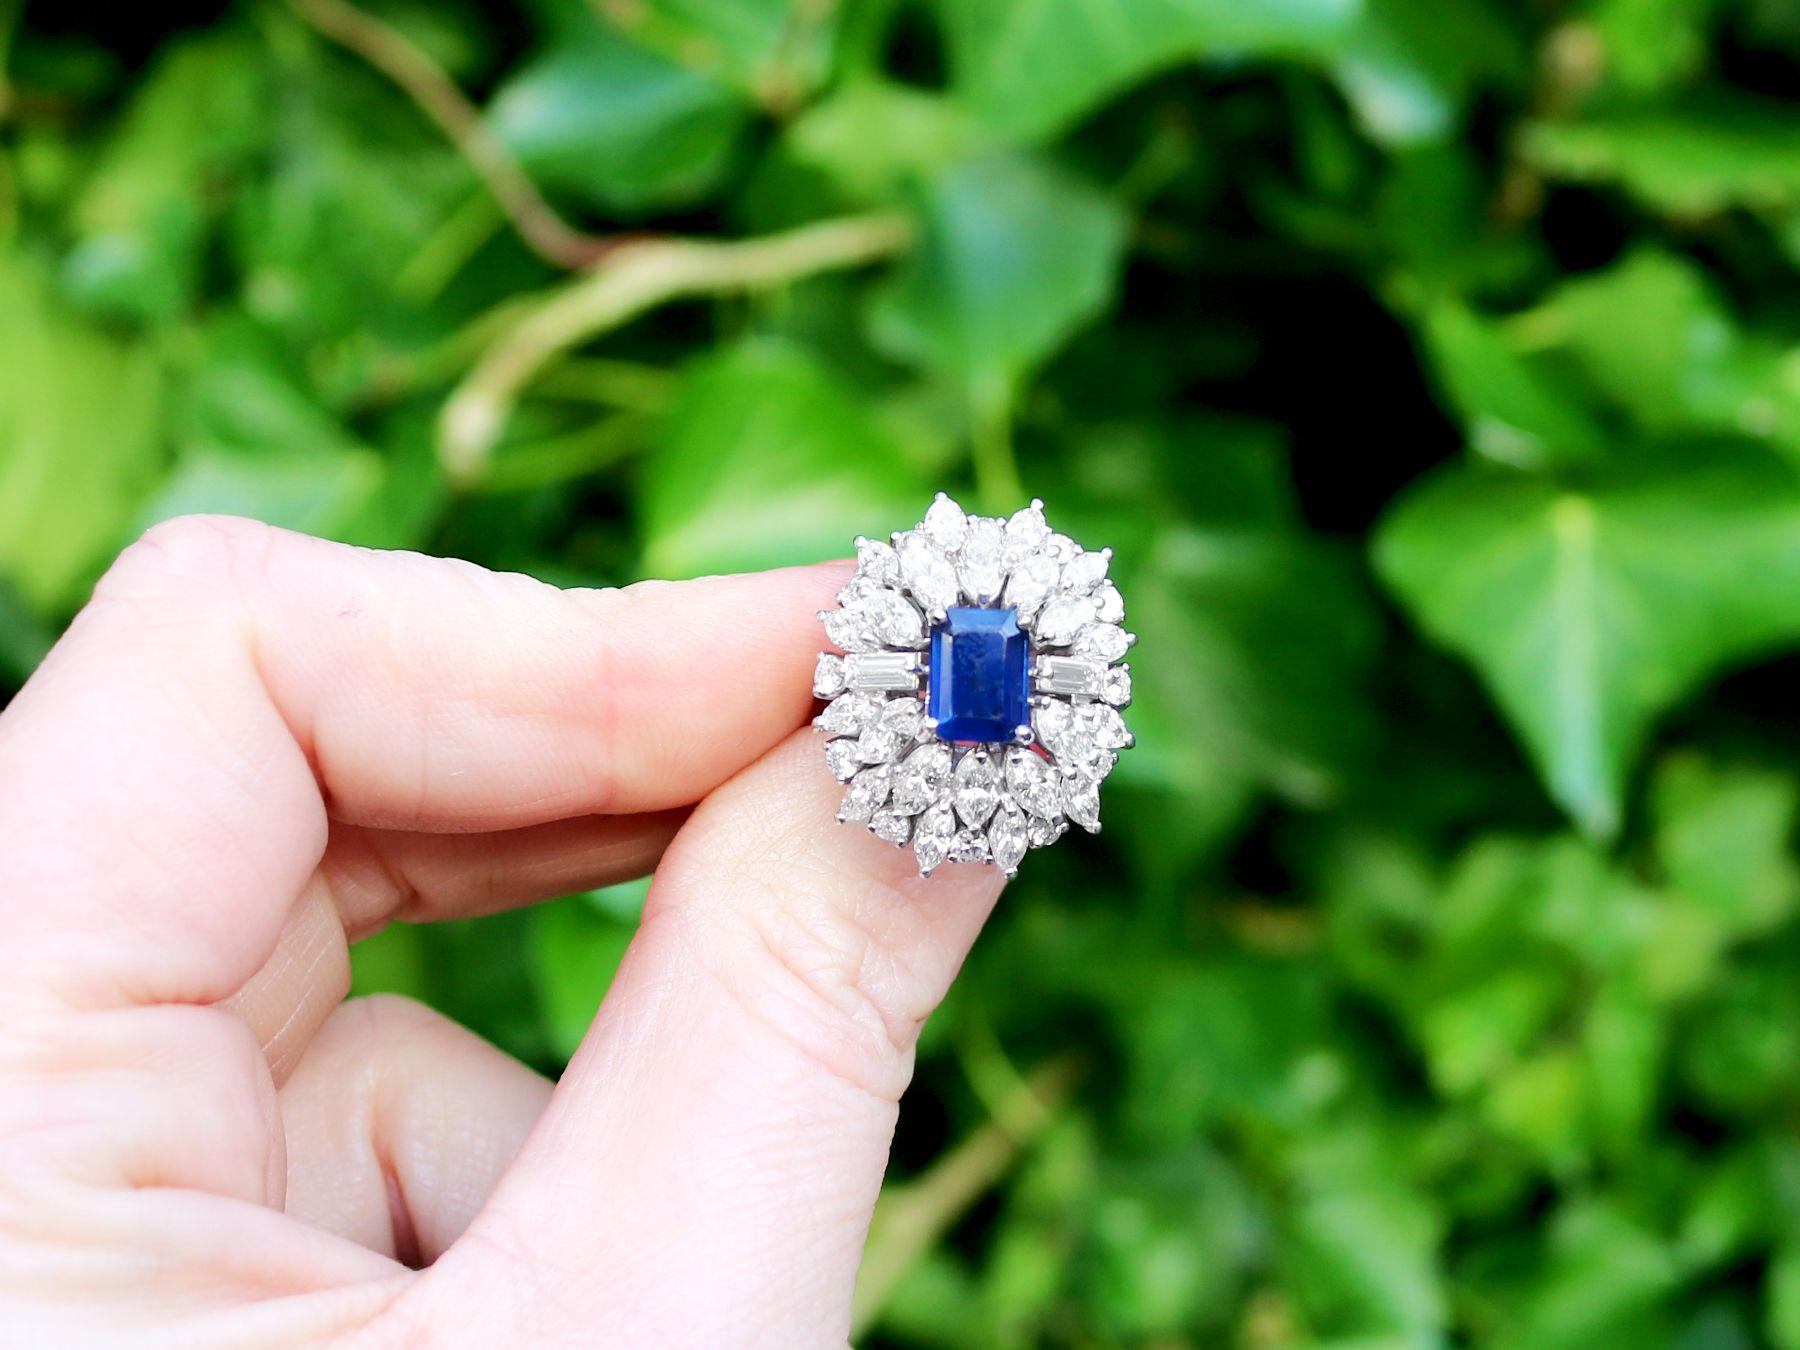 A stunning and impressive vintage 1.97 carat sapphire and 4.05 carat diamond, 15 karat white gold dress ring; part of our diverse antique estate jewelry collections

This stunning, fine and impressive sapphire and diamond ring has been crafted in